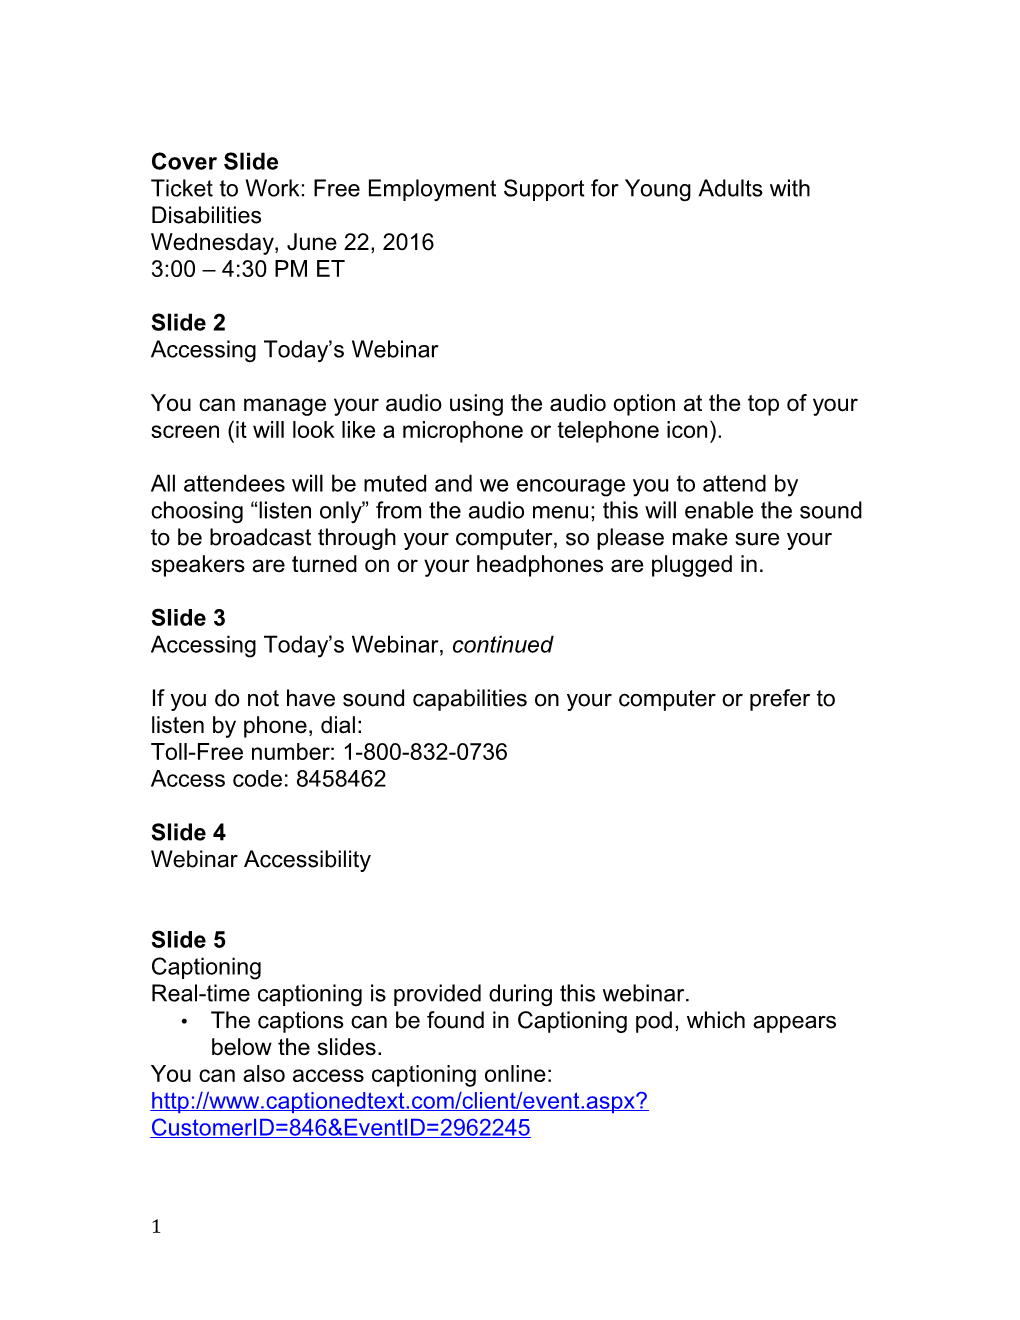 Ticket to Work: Free Employment Support for Young Adults with Disabilities